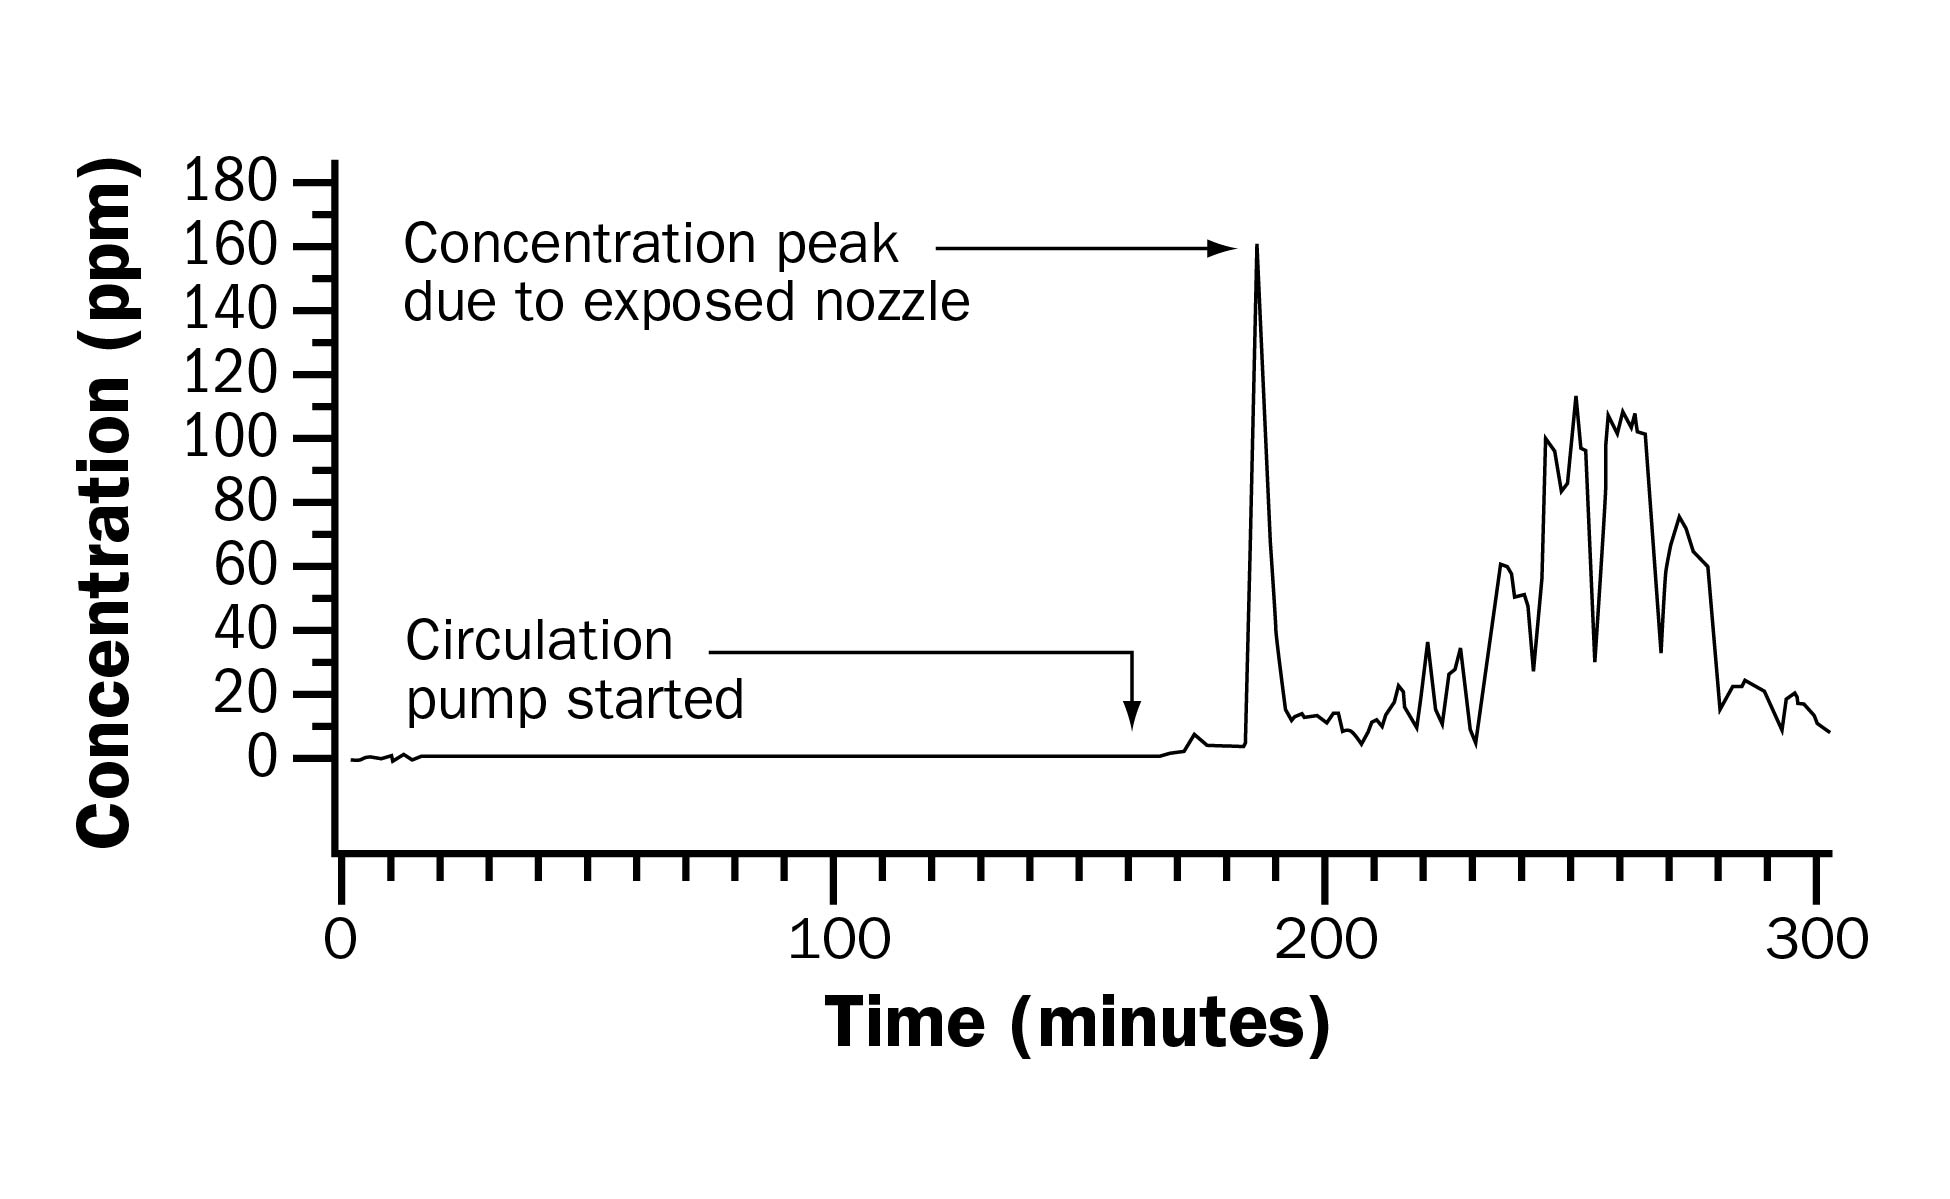 graph illustrating the quick rise in hydrogen sulphide during pit agitation. The graph shows that there is a dramatic rise in hydrogen sulphide in the event that the pump nozzle becomes exposed